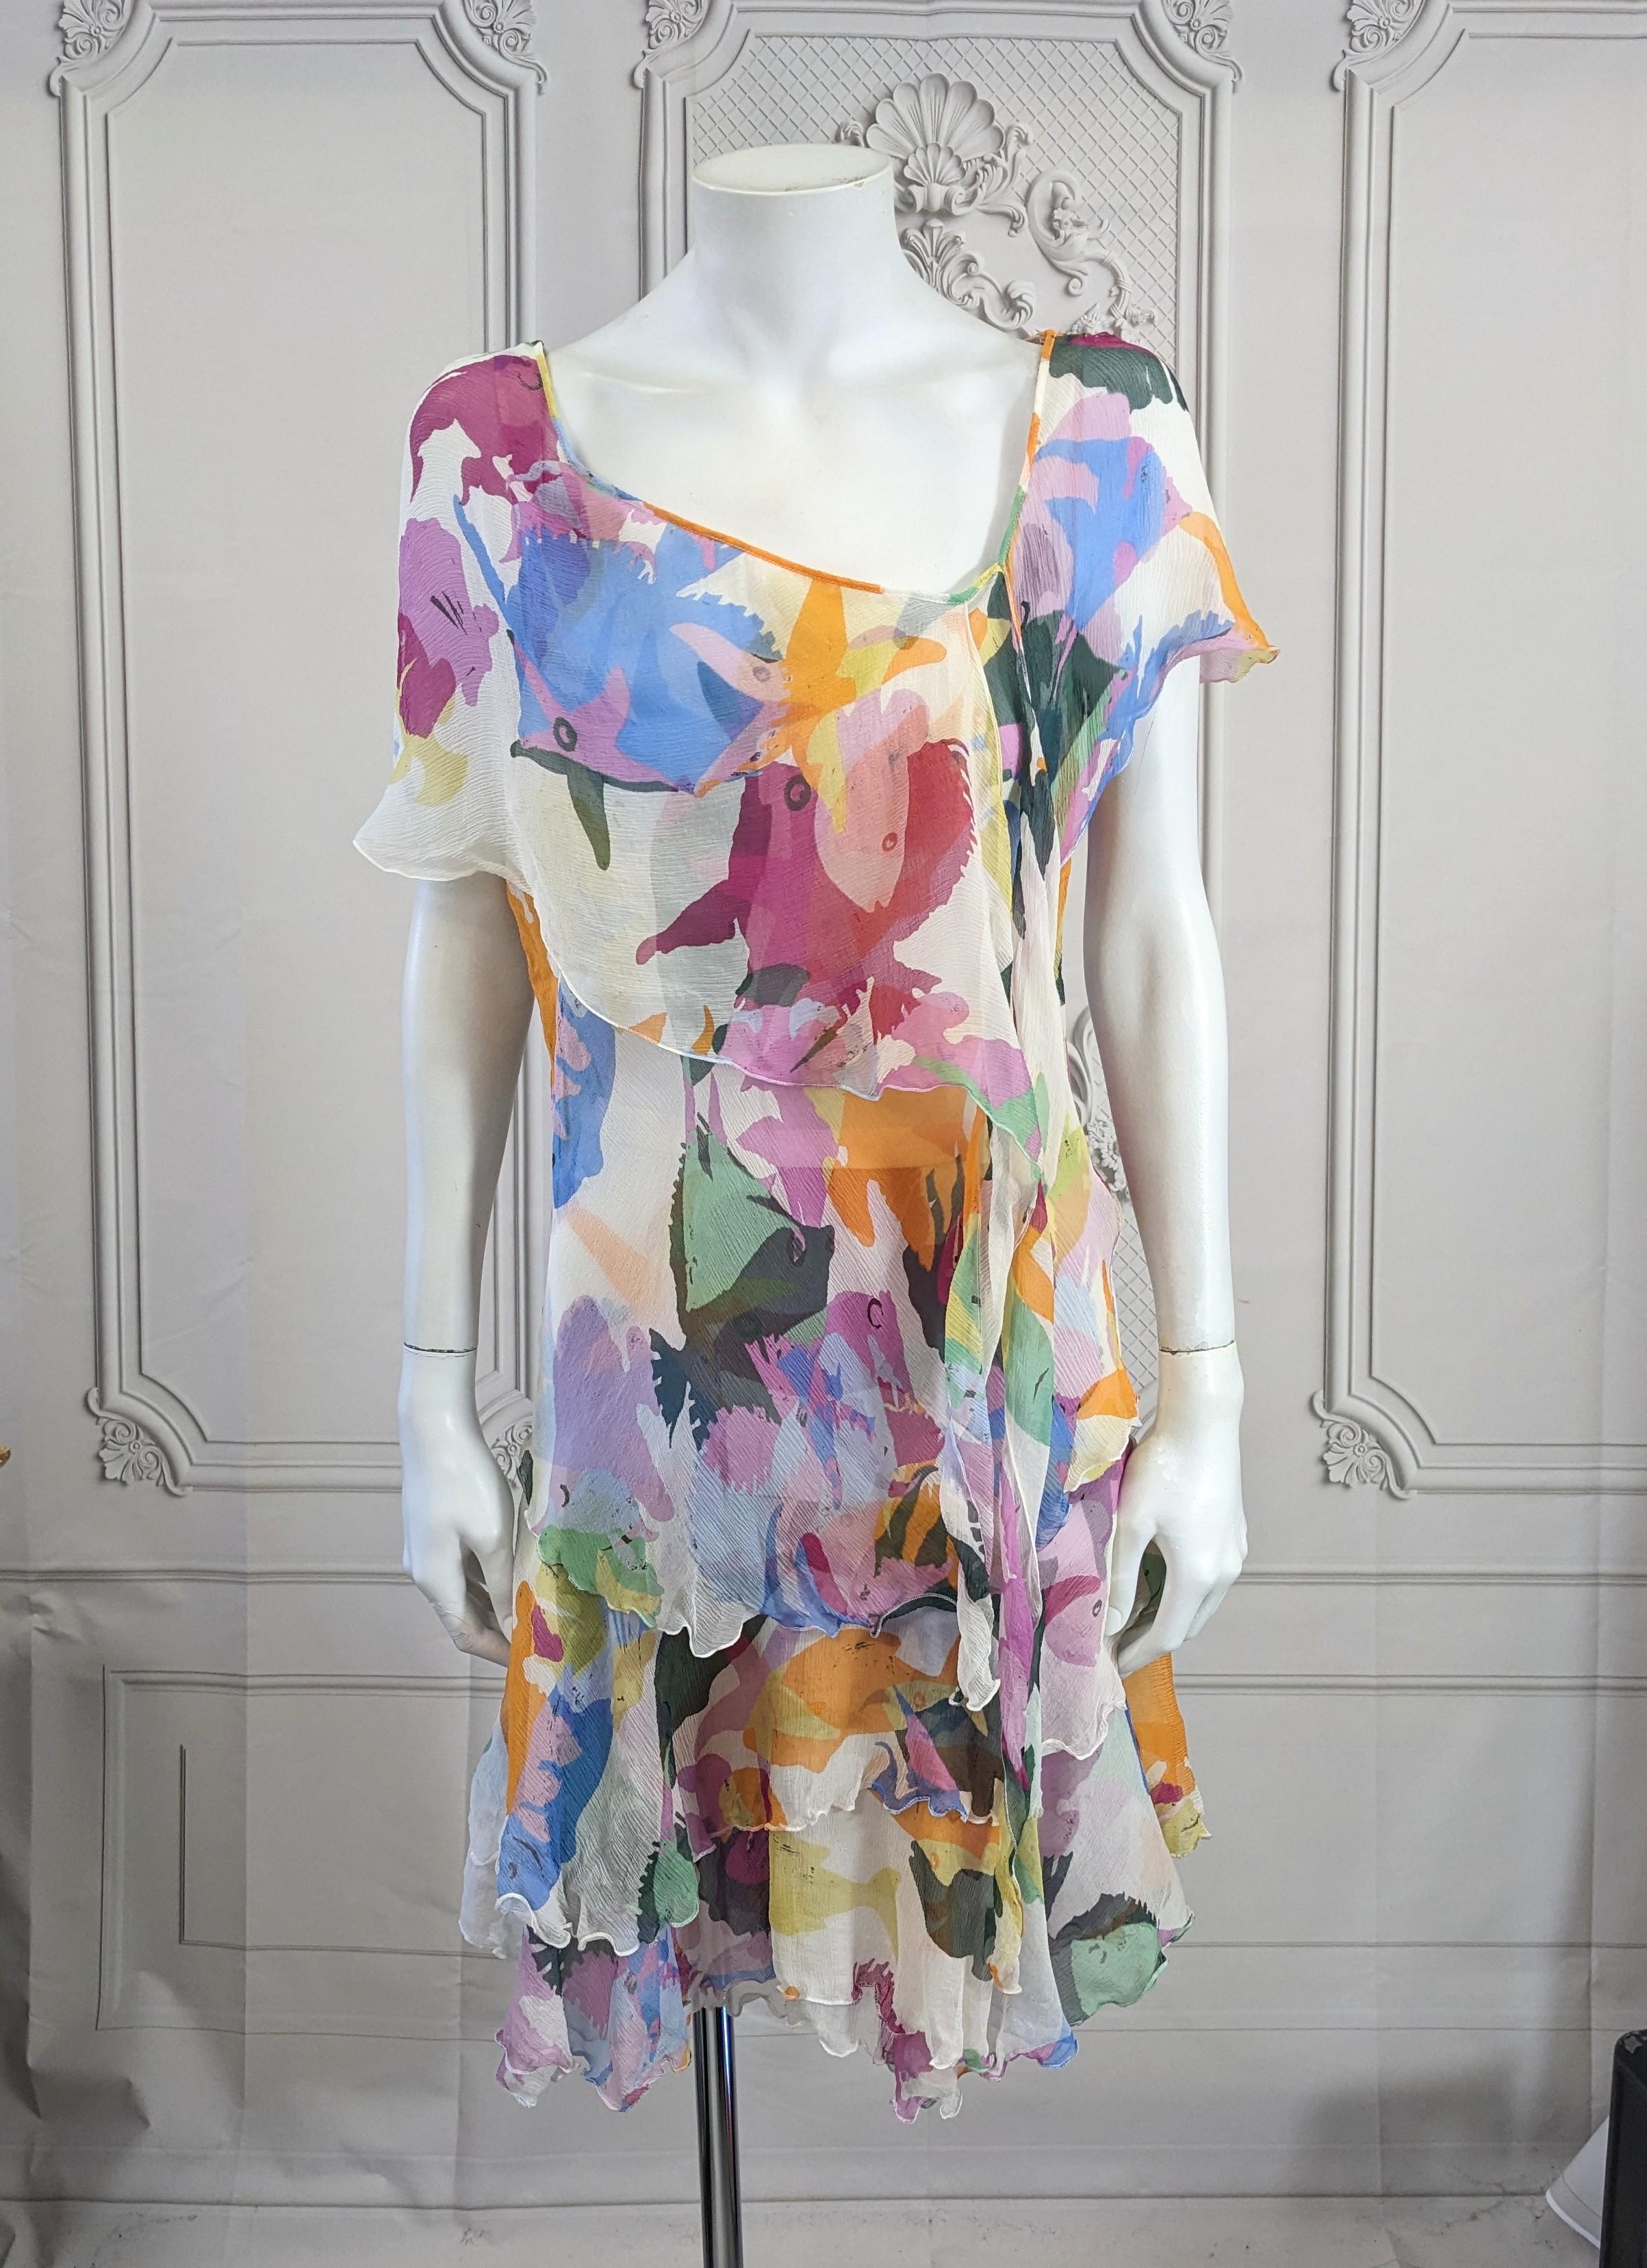 Moschino Silk Chiffon Aquatic Print Set In Good Condition For Sale In New York, NY